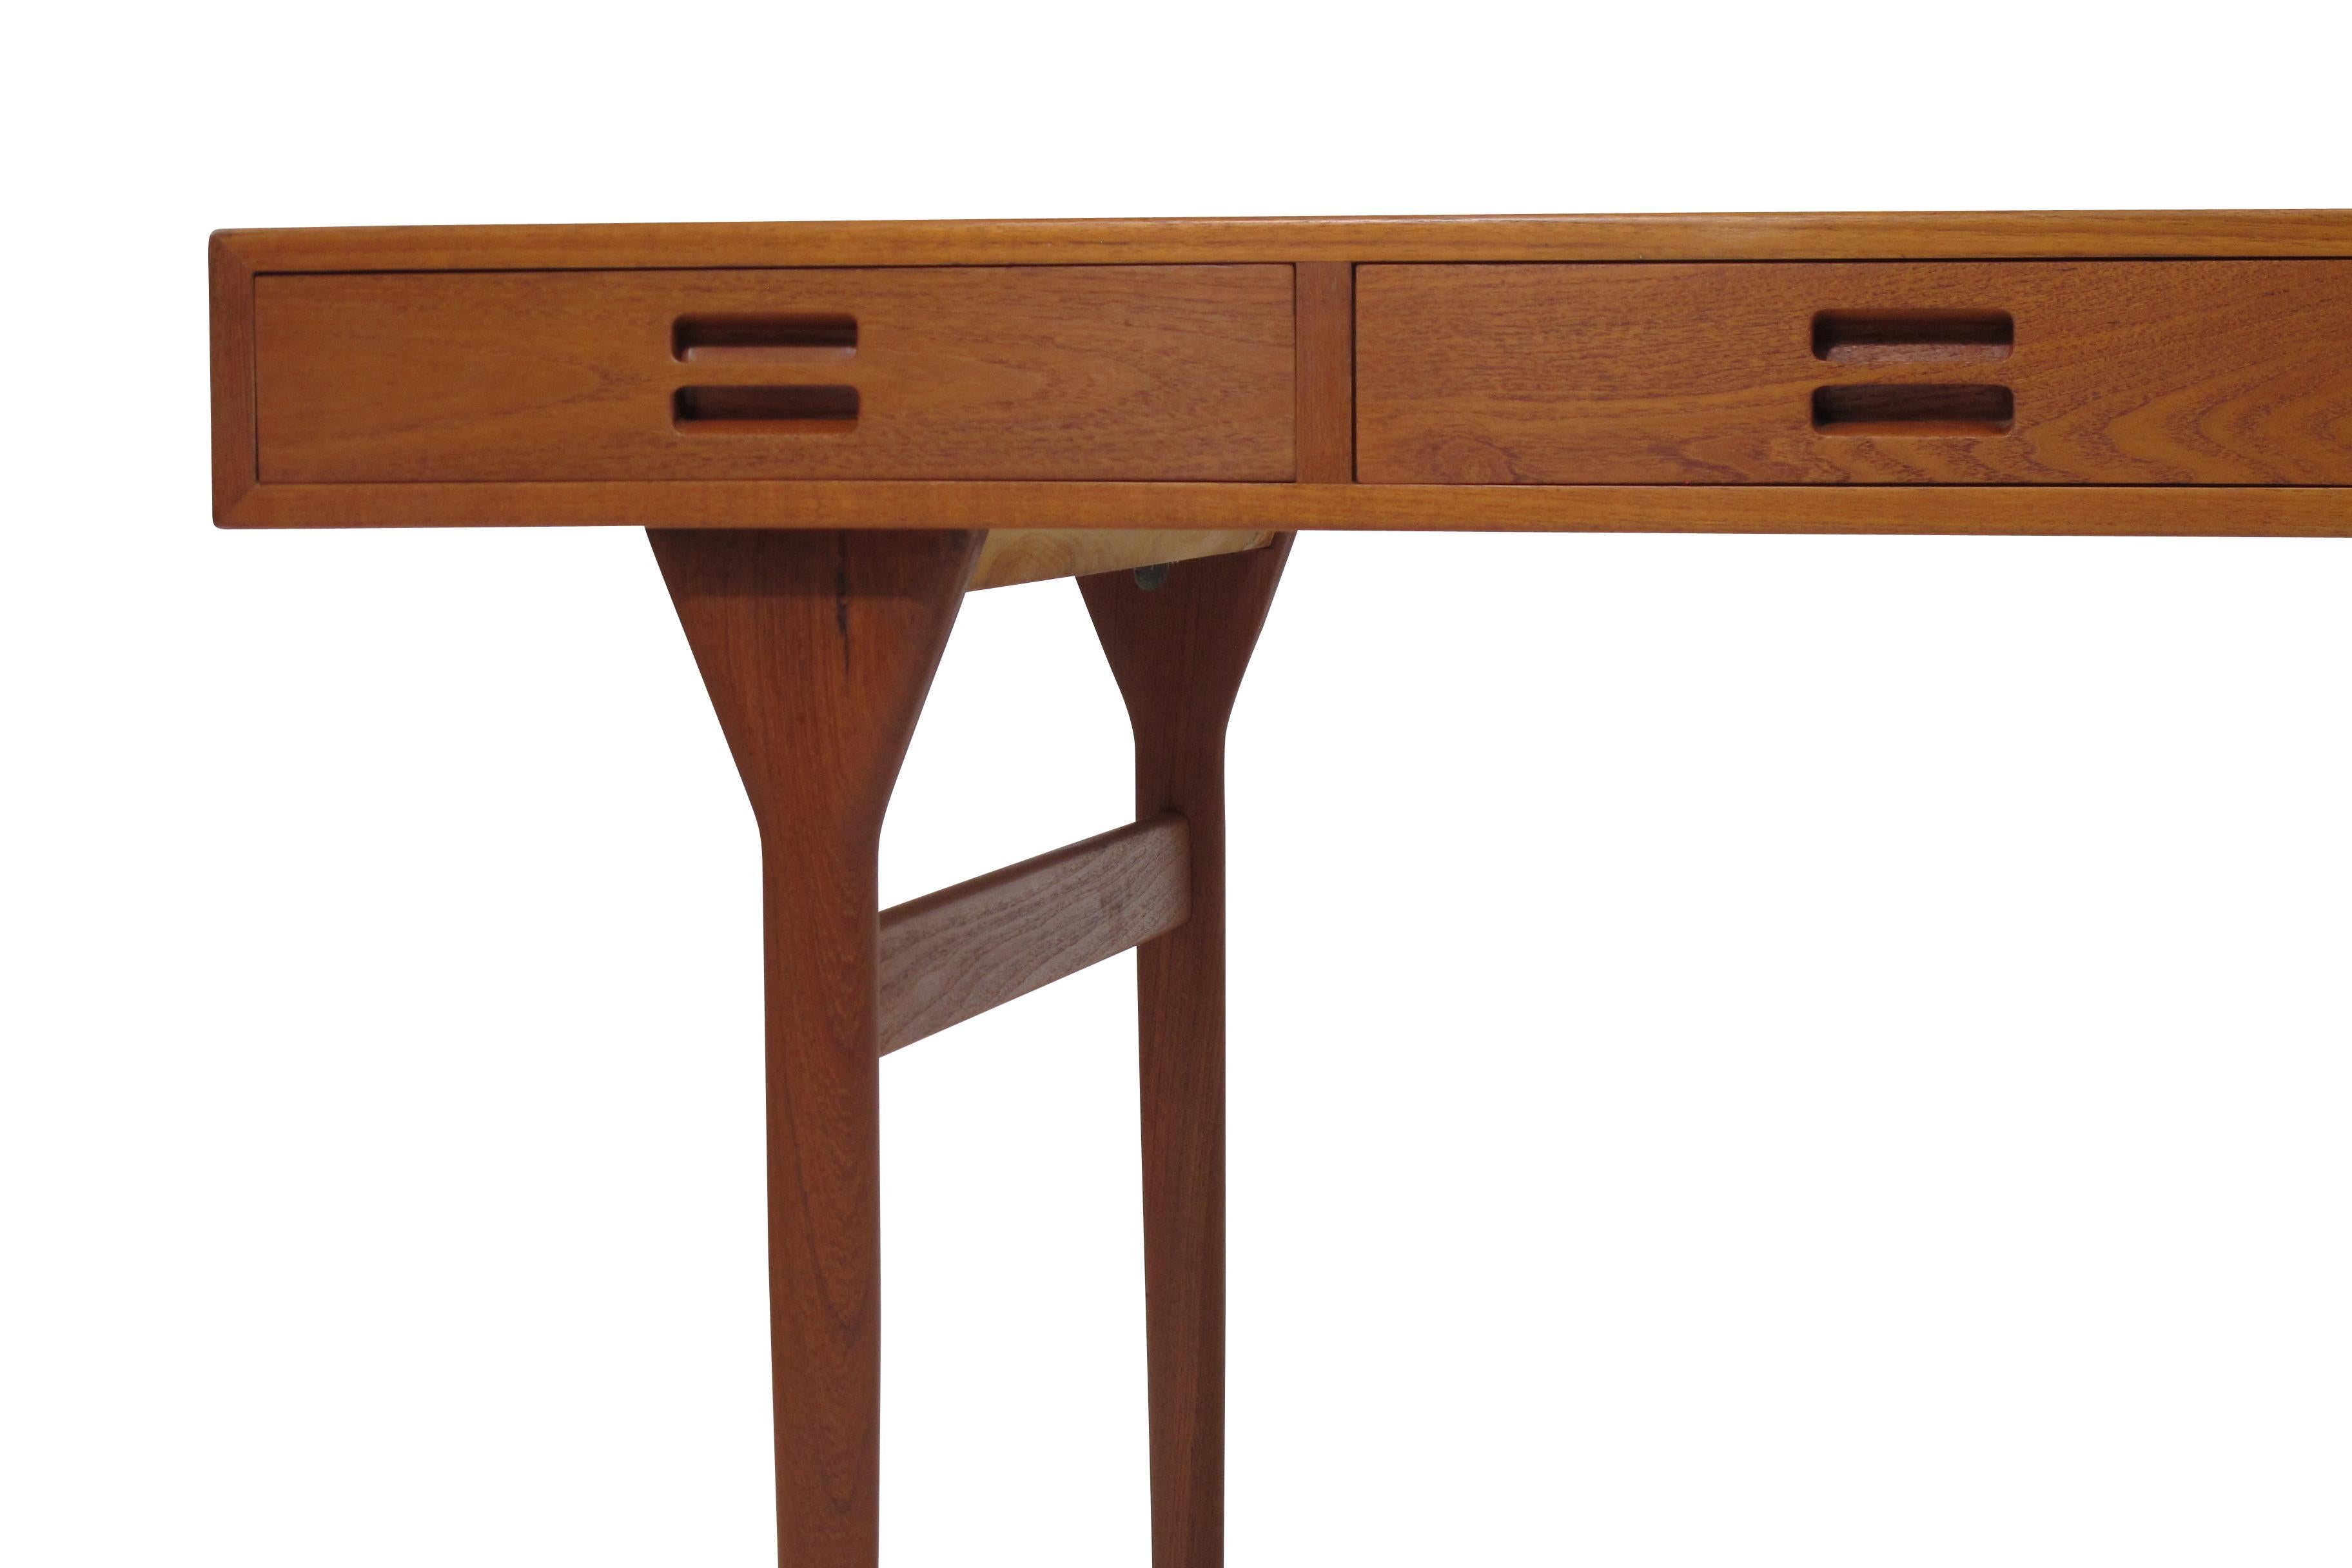 Executive desk designed by renown Danish designer Nanna Ditzel for Soren Willadsen Mobelfabrik, Model ND 93, circa 1955 Denmark. The desk is handcrafted of fine growth teak and features series of four drawers and sculpted pulls. Finely restored in